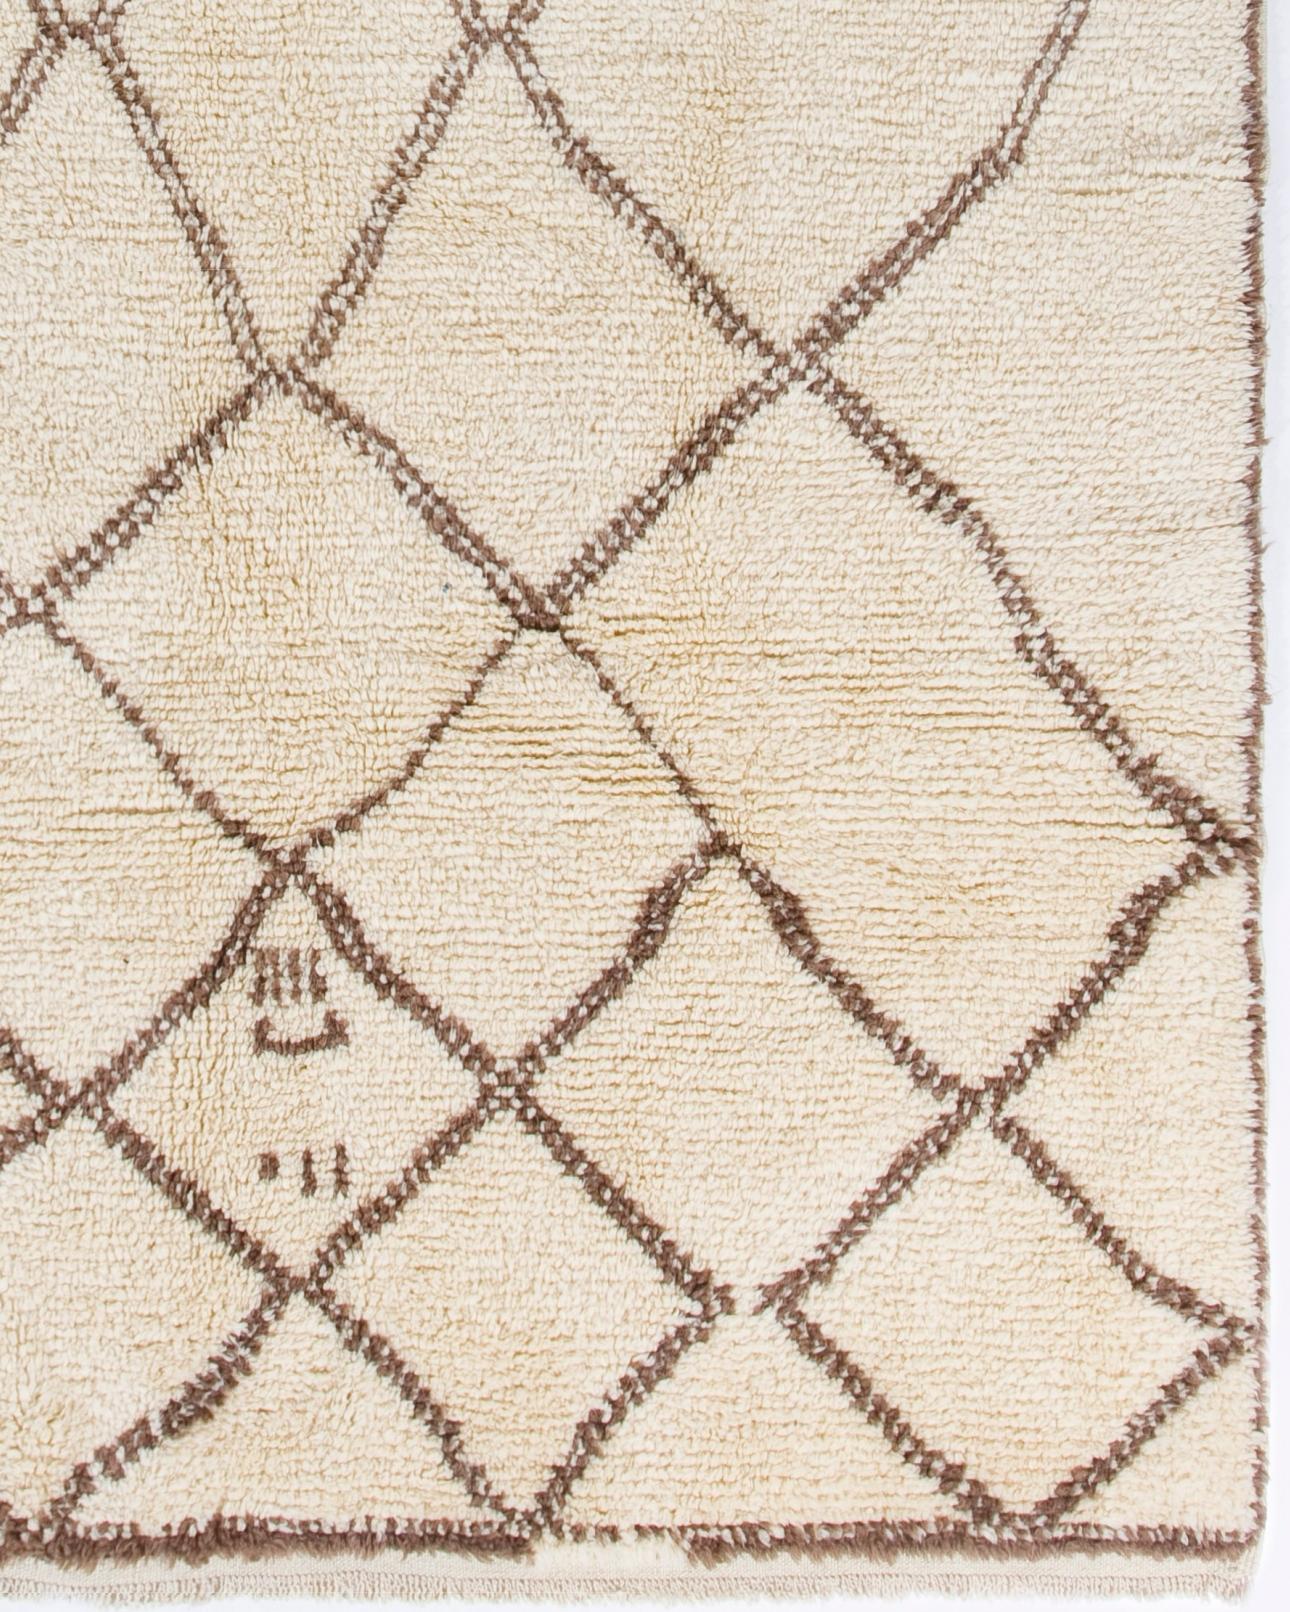 Hand-Knotted 6x9.4 ft Moroccan Berber Tulu Rug Made of Natural Wool. Custom Options Available For Sale